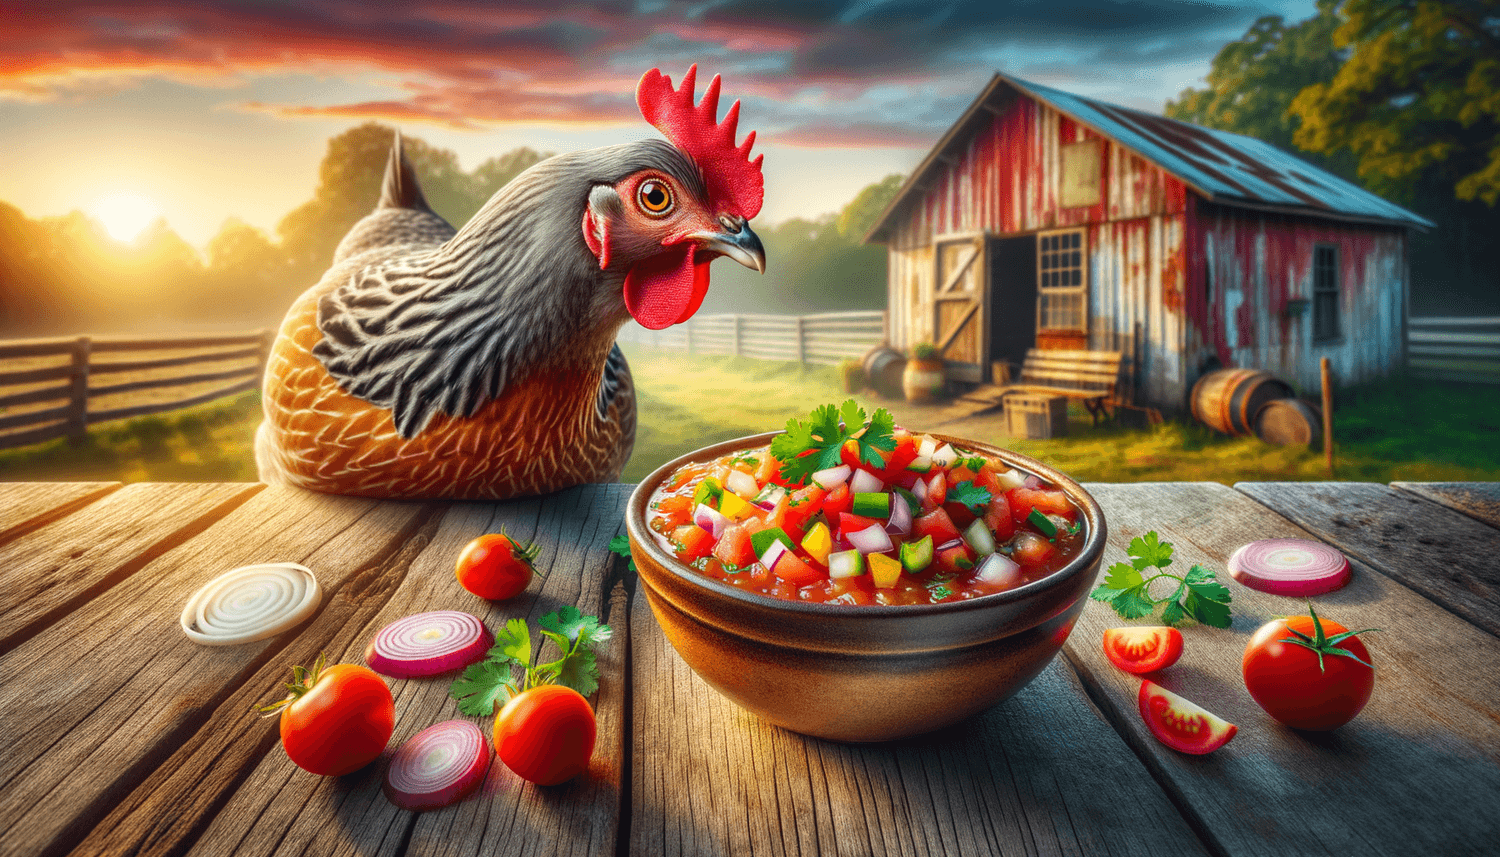 Can Chickens Eat Salsa?